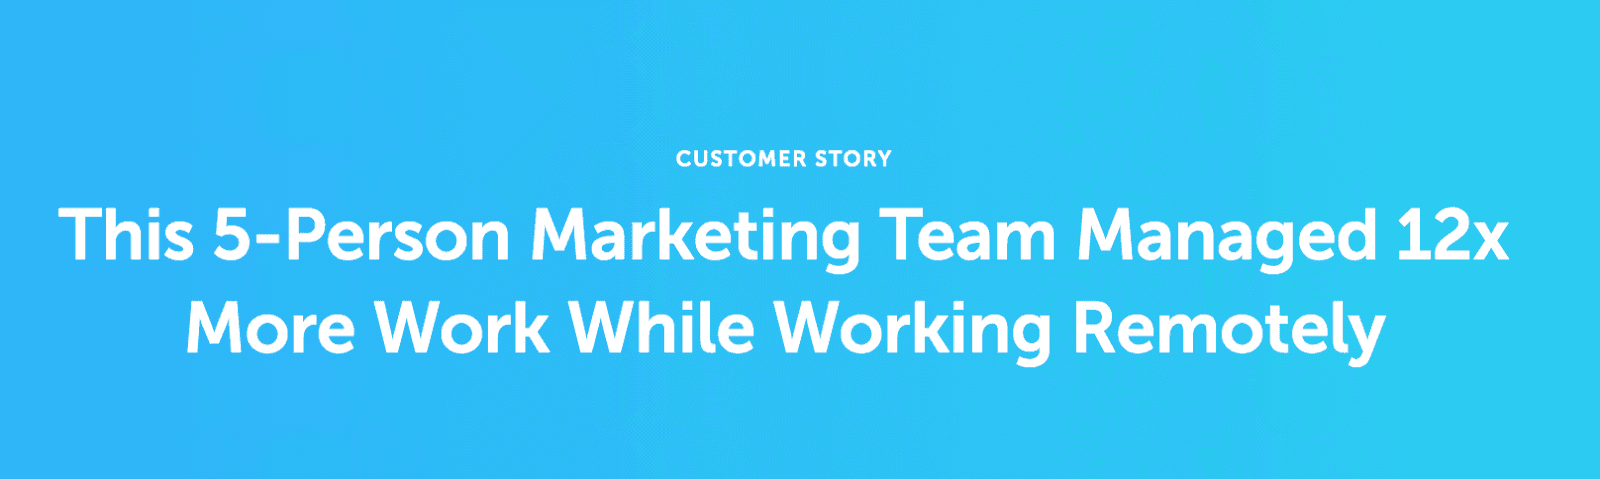 CoSchedule customer story/case study